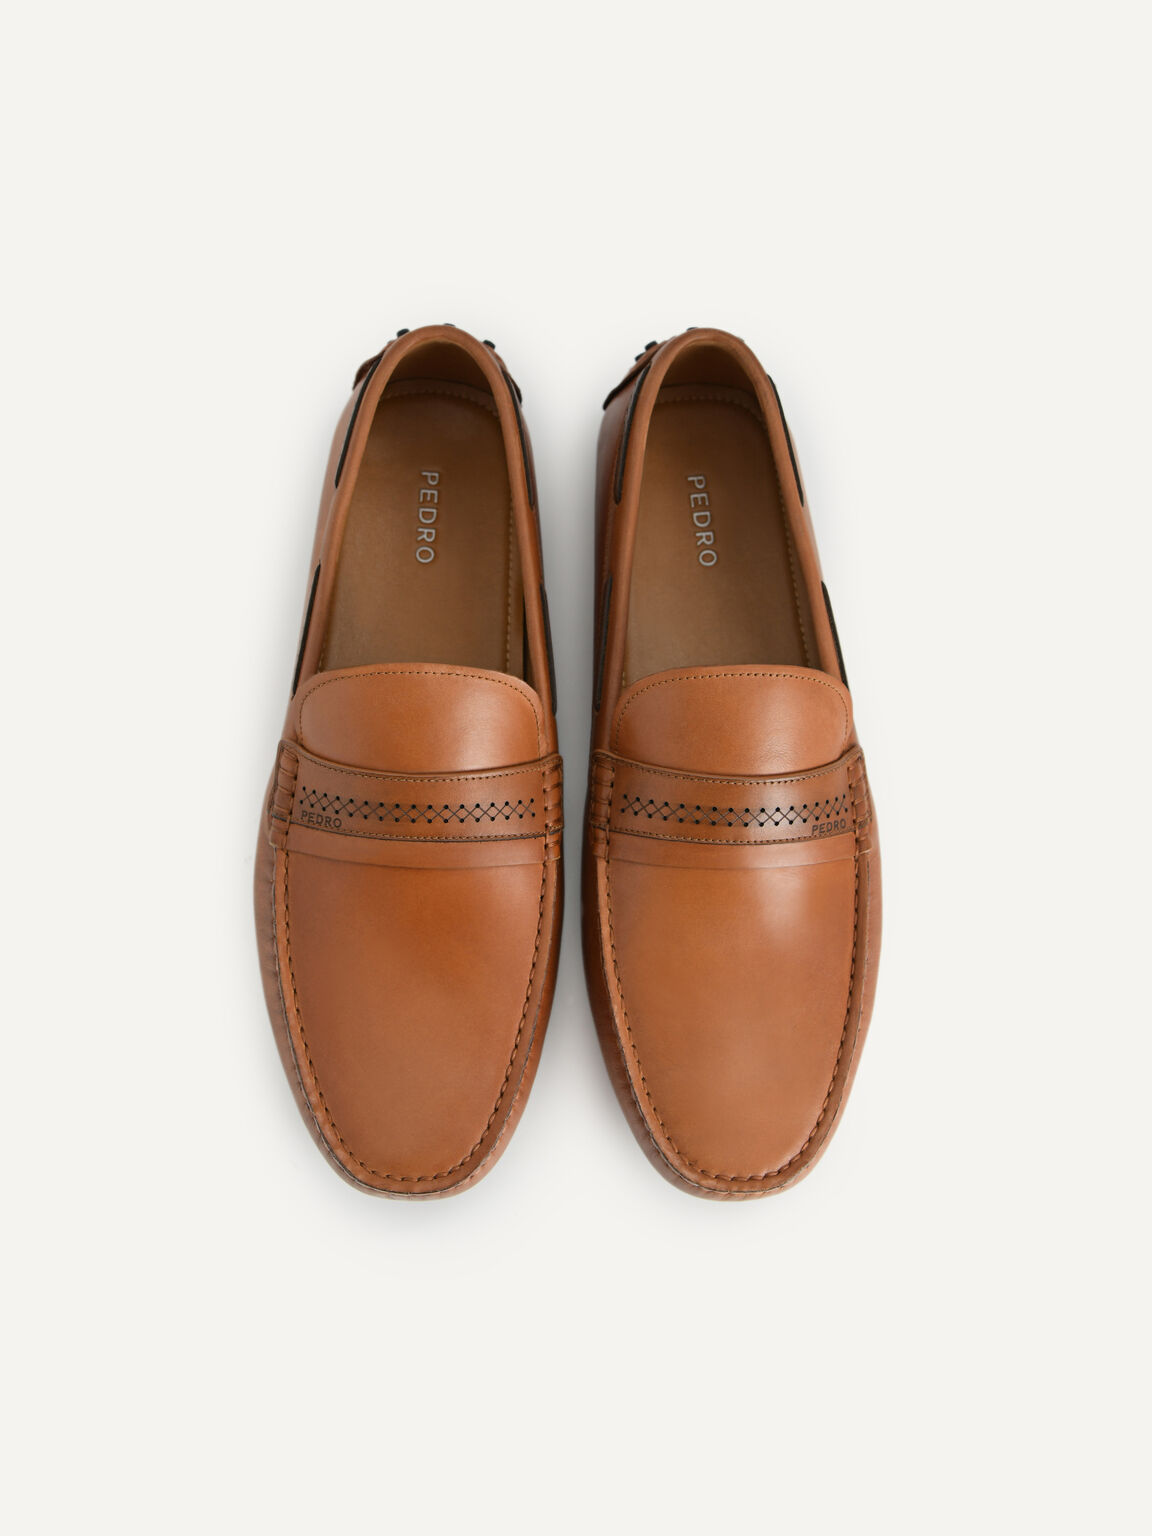 Leather Moccasins with Stitch Detailing, Camel, hi-res